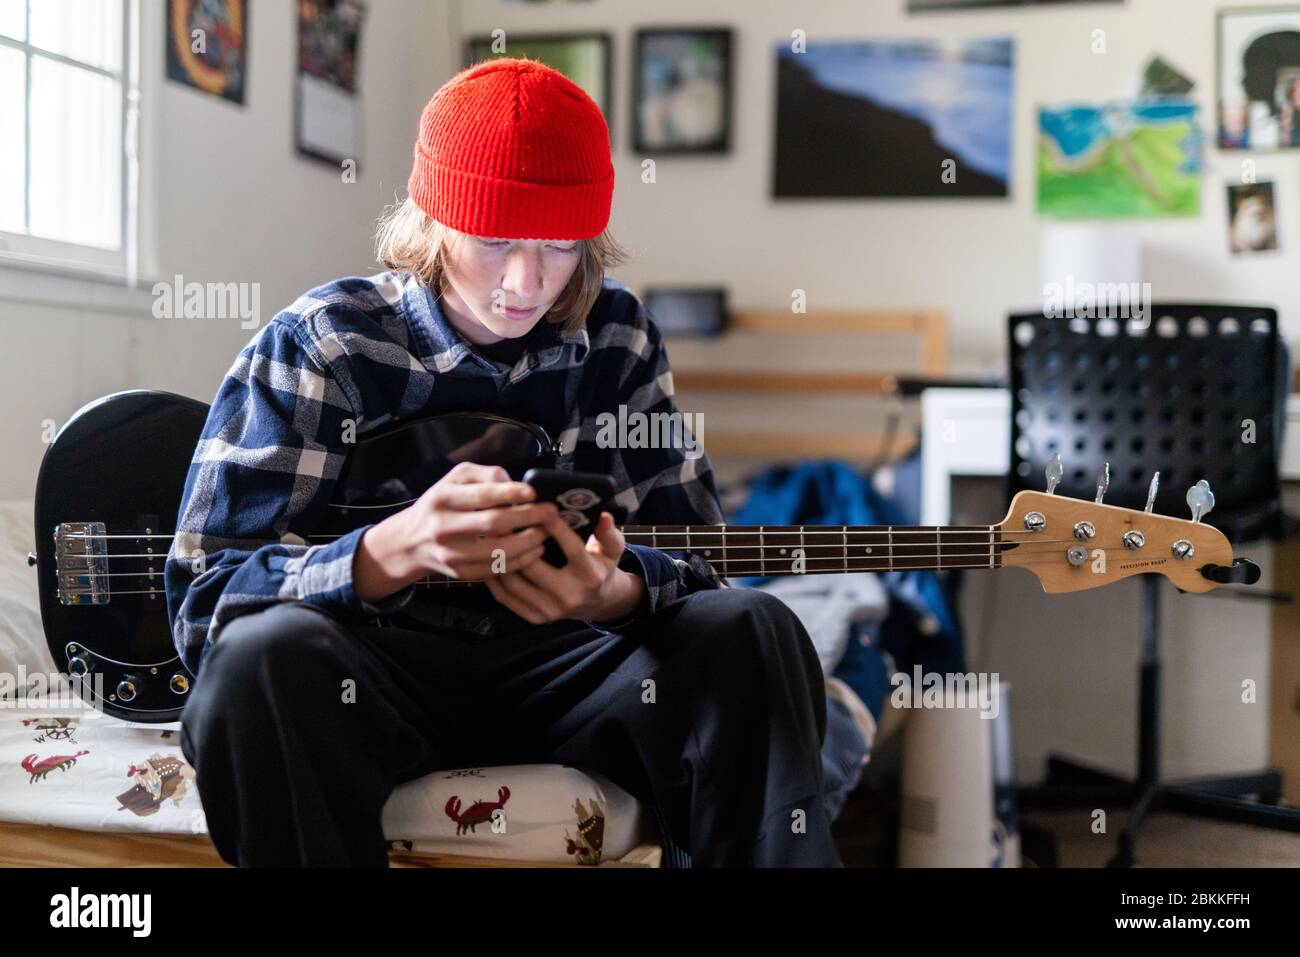 Teenager looking at smart phone while holding bass guitar in bedroom Stock Photo